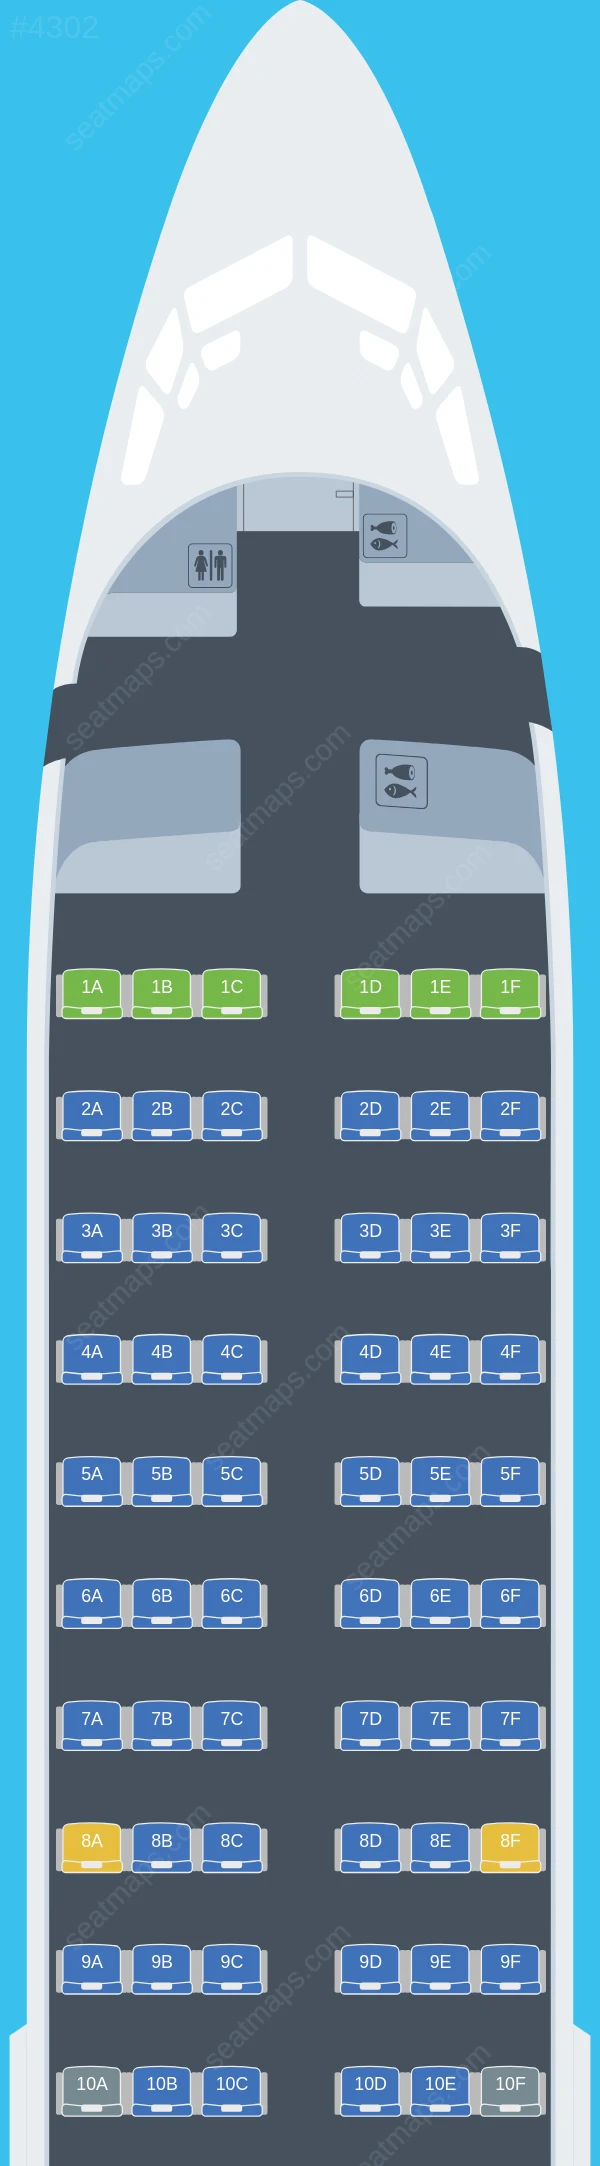 Air North Boeing 737-400 seatmap preview